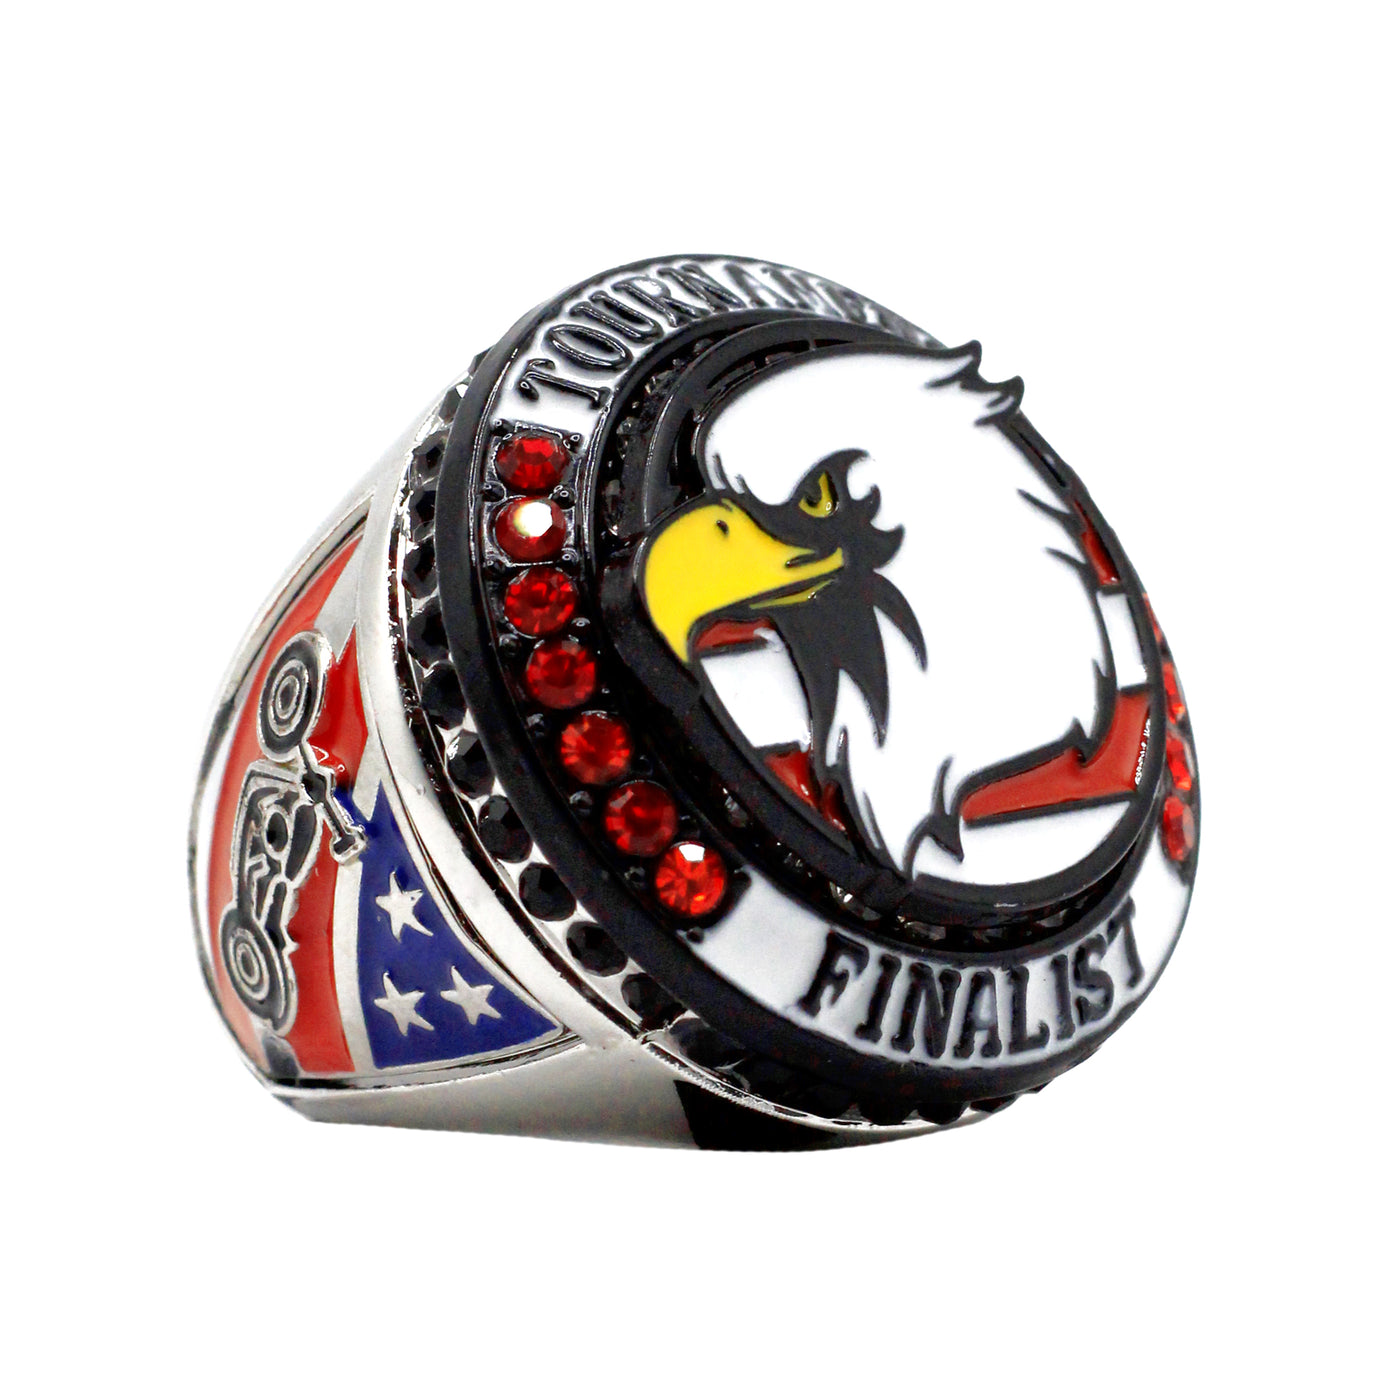 MEMORIAL DAY EAGLE TOURNAMENT FINALIST RING